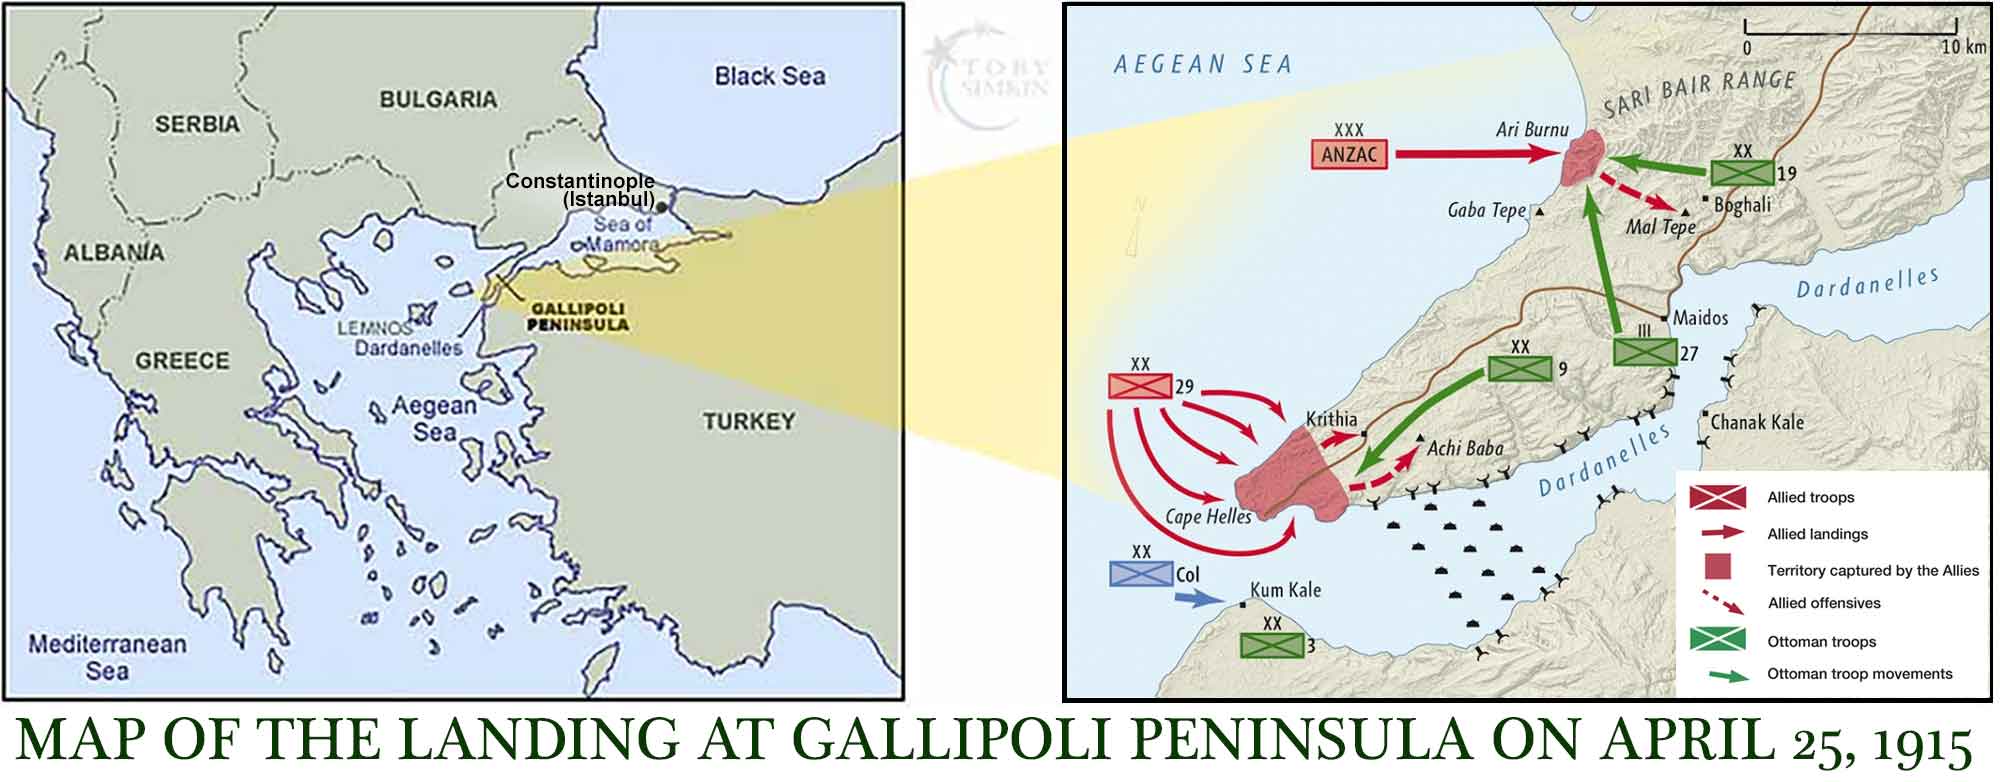 Map of the Landing at Gallipoli Peninsula in World War I at dawn on April 25, 1915 by ANZAC's